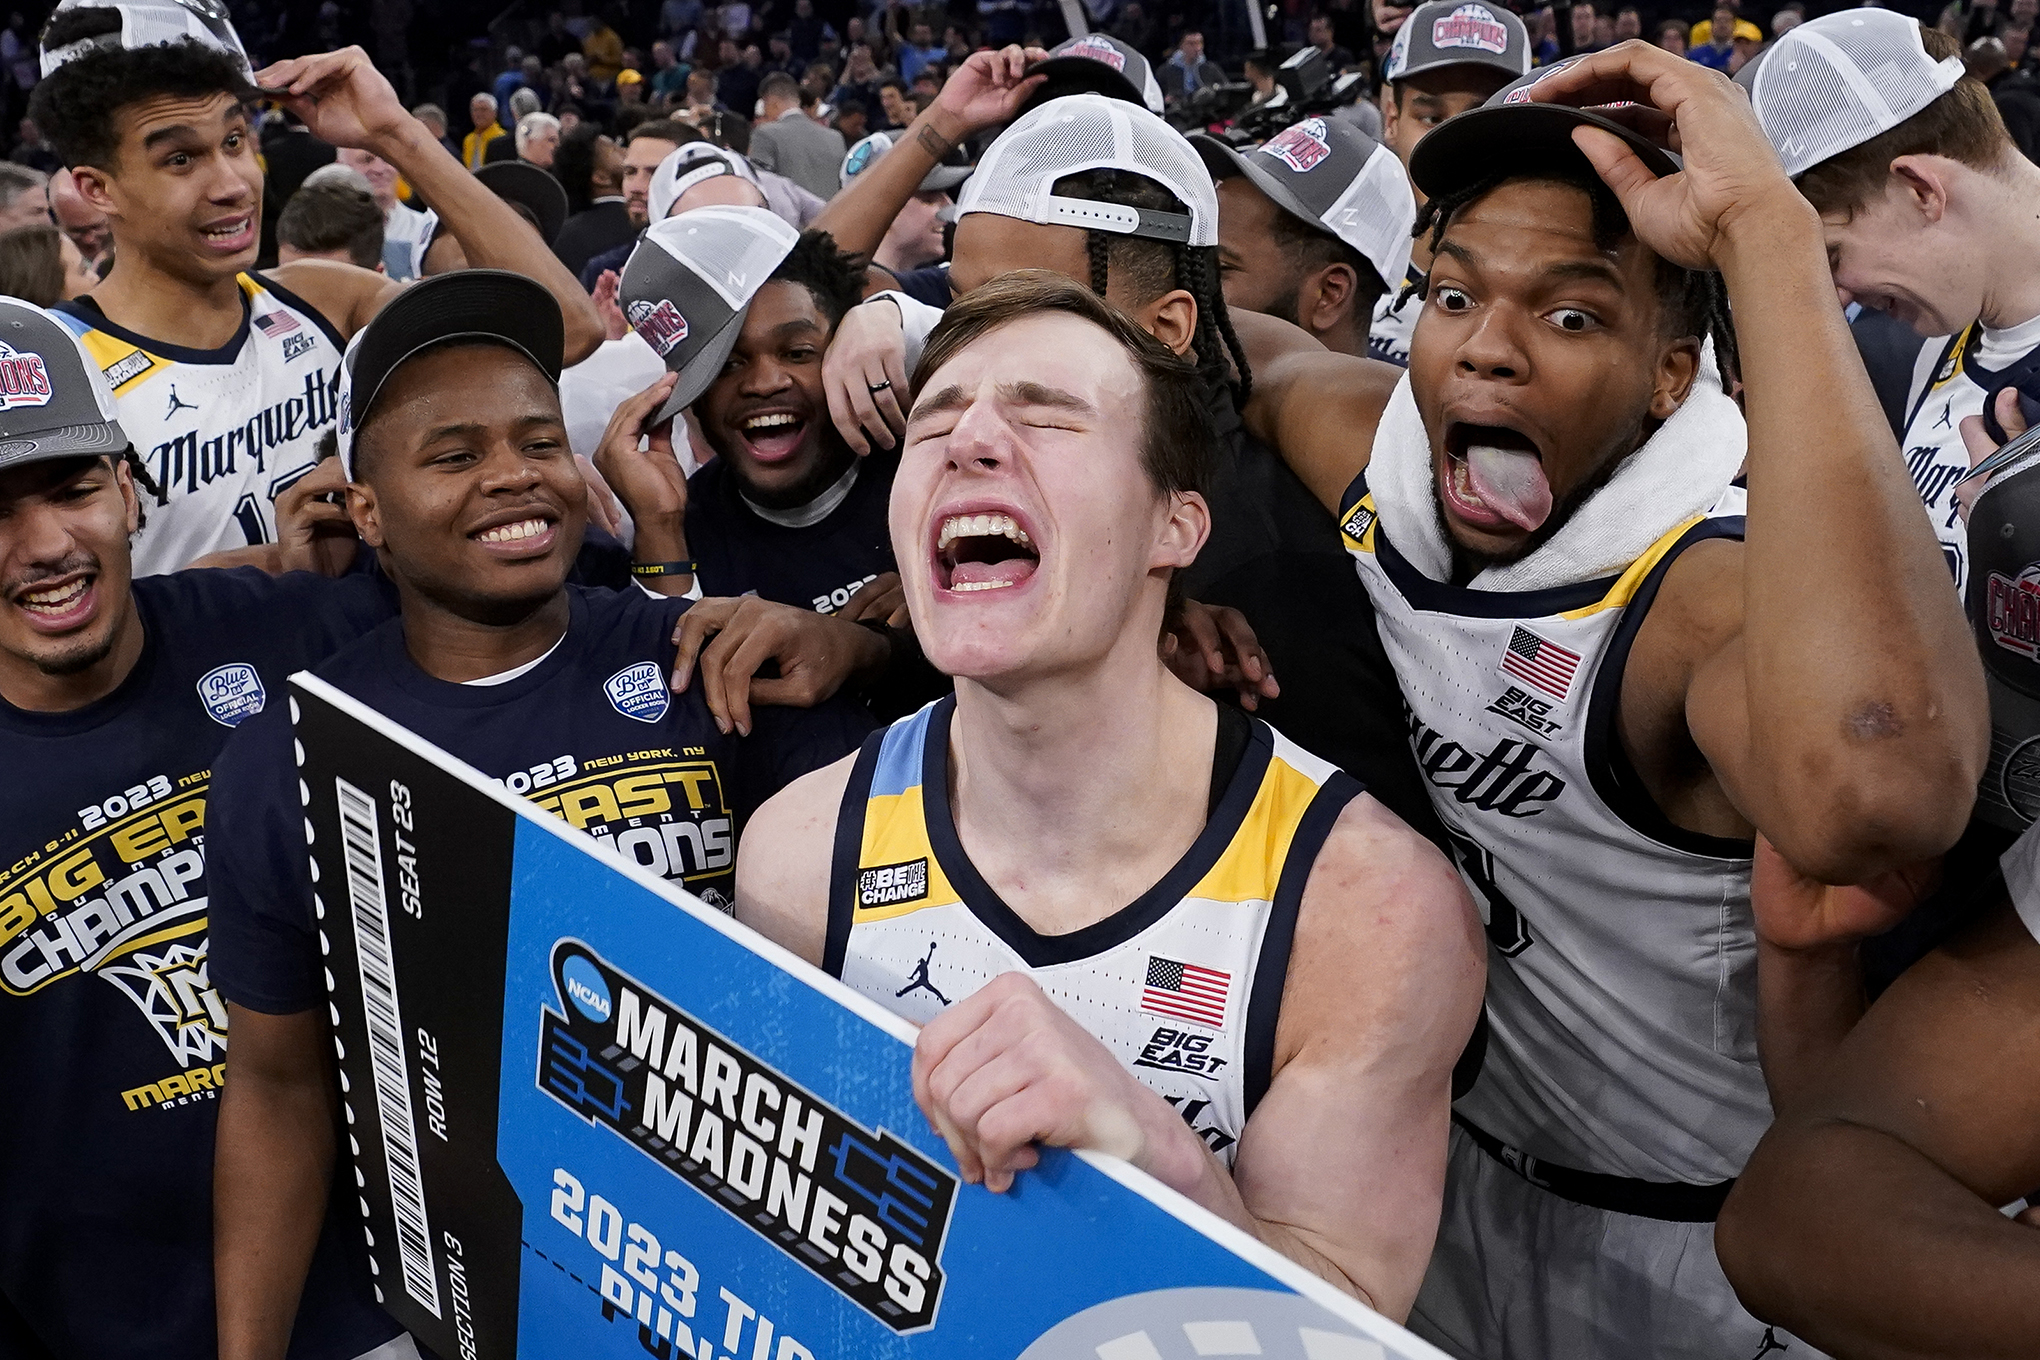 ‘The madness is here’: Marquette University basketball ready to shine in March Madness tournaments